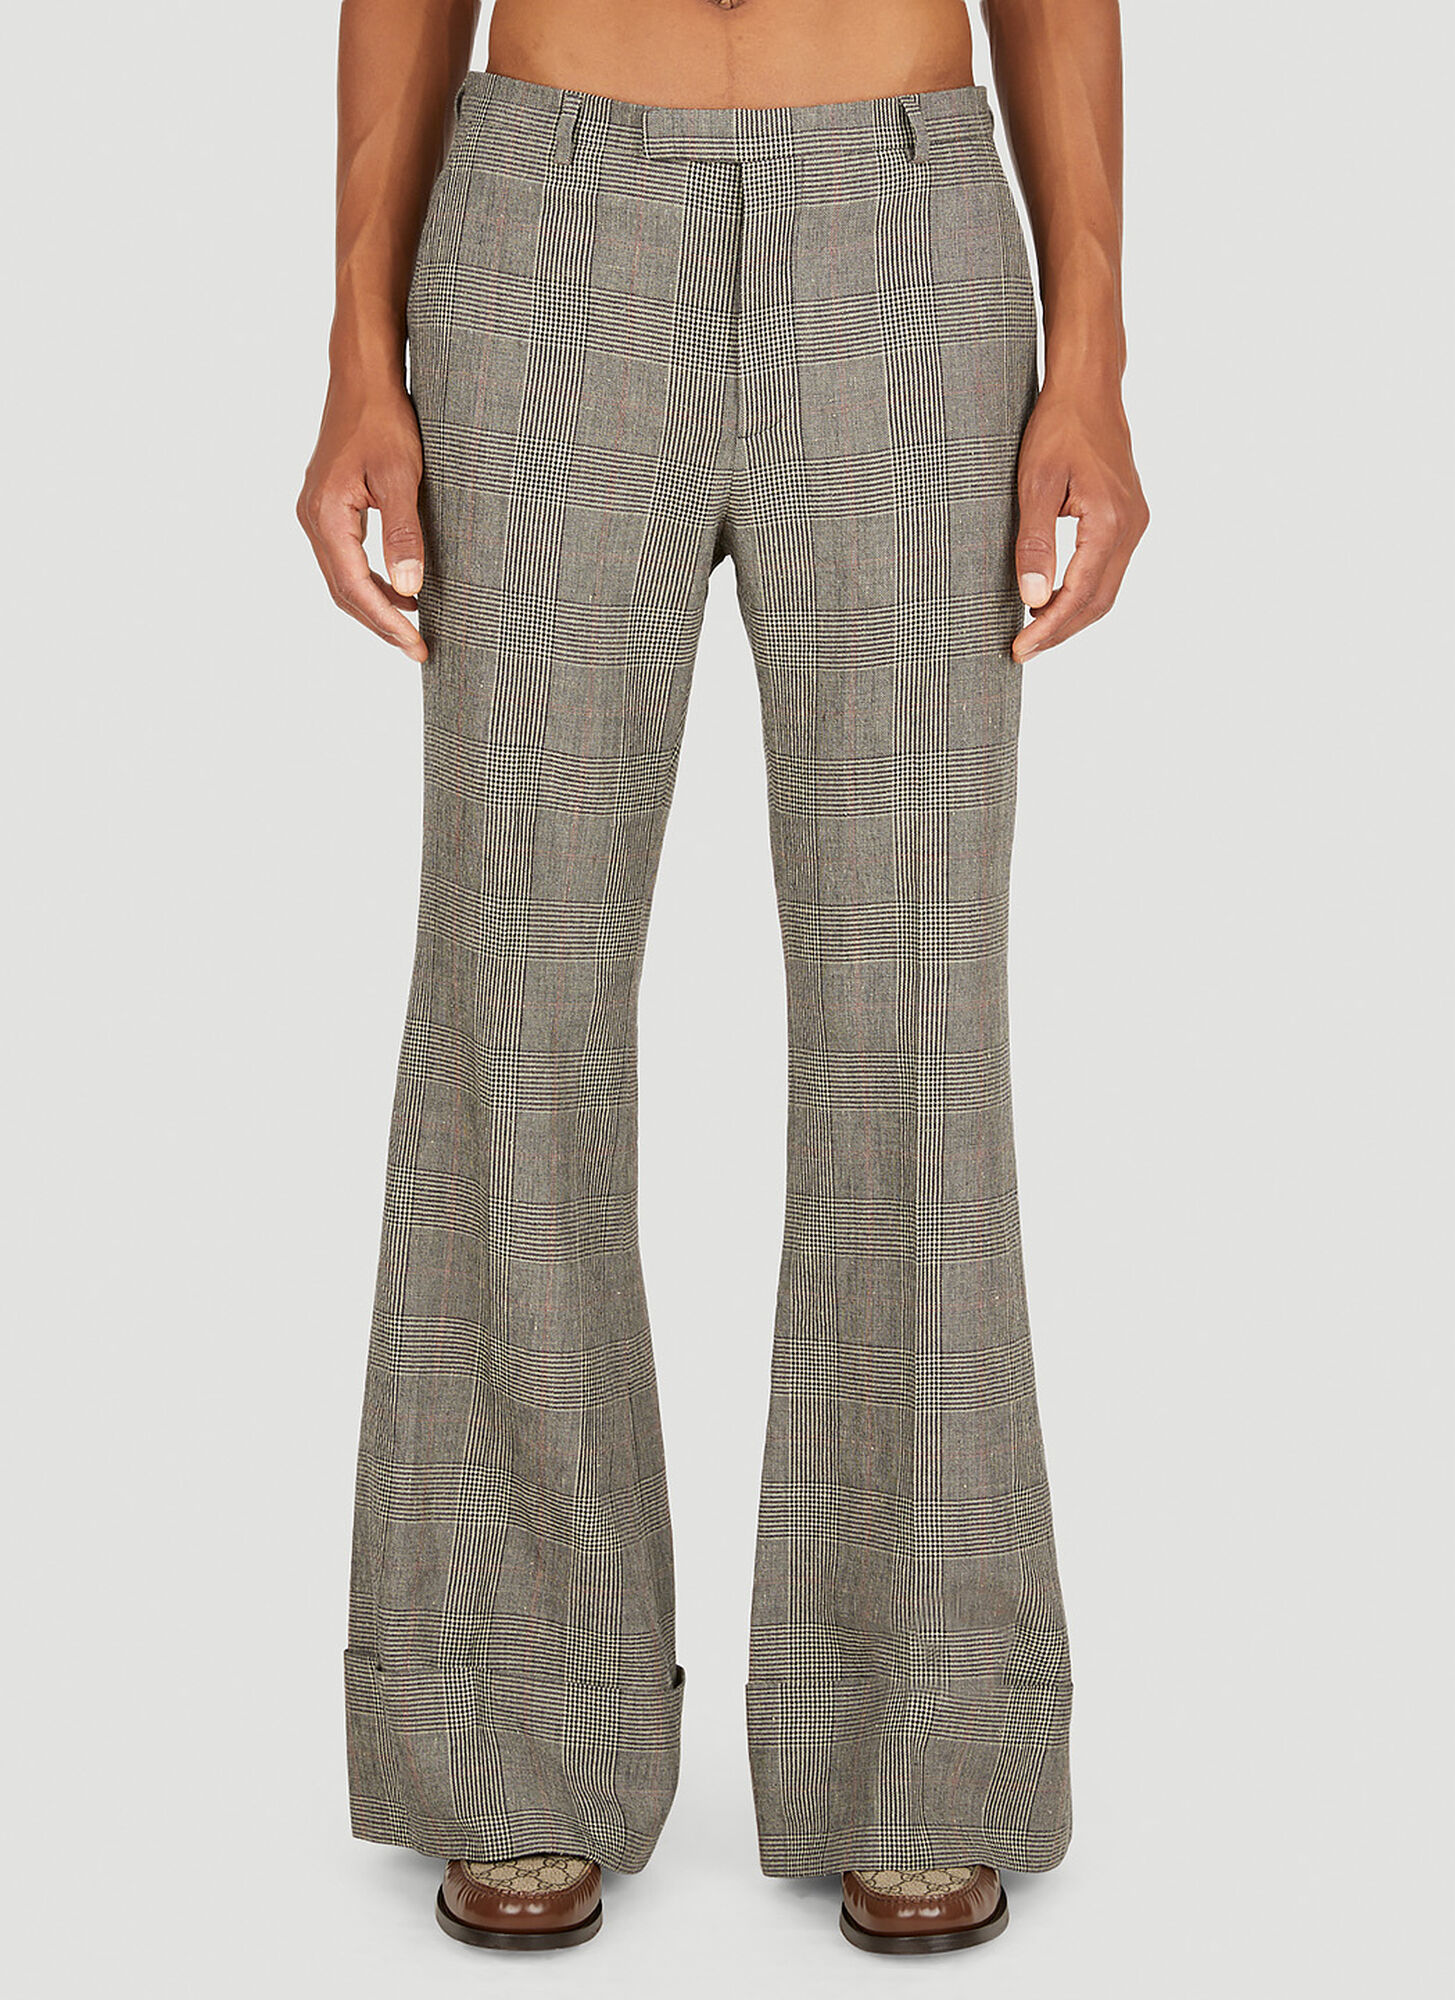 GUCCI PRINCE OF WALES FLARED trousers